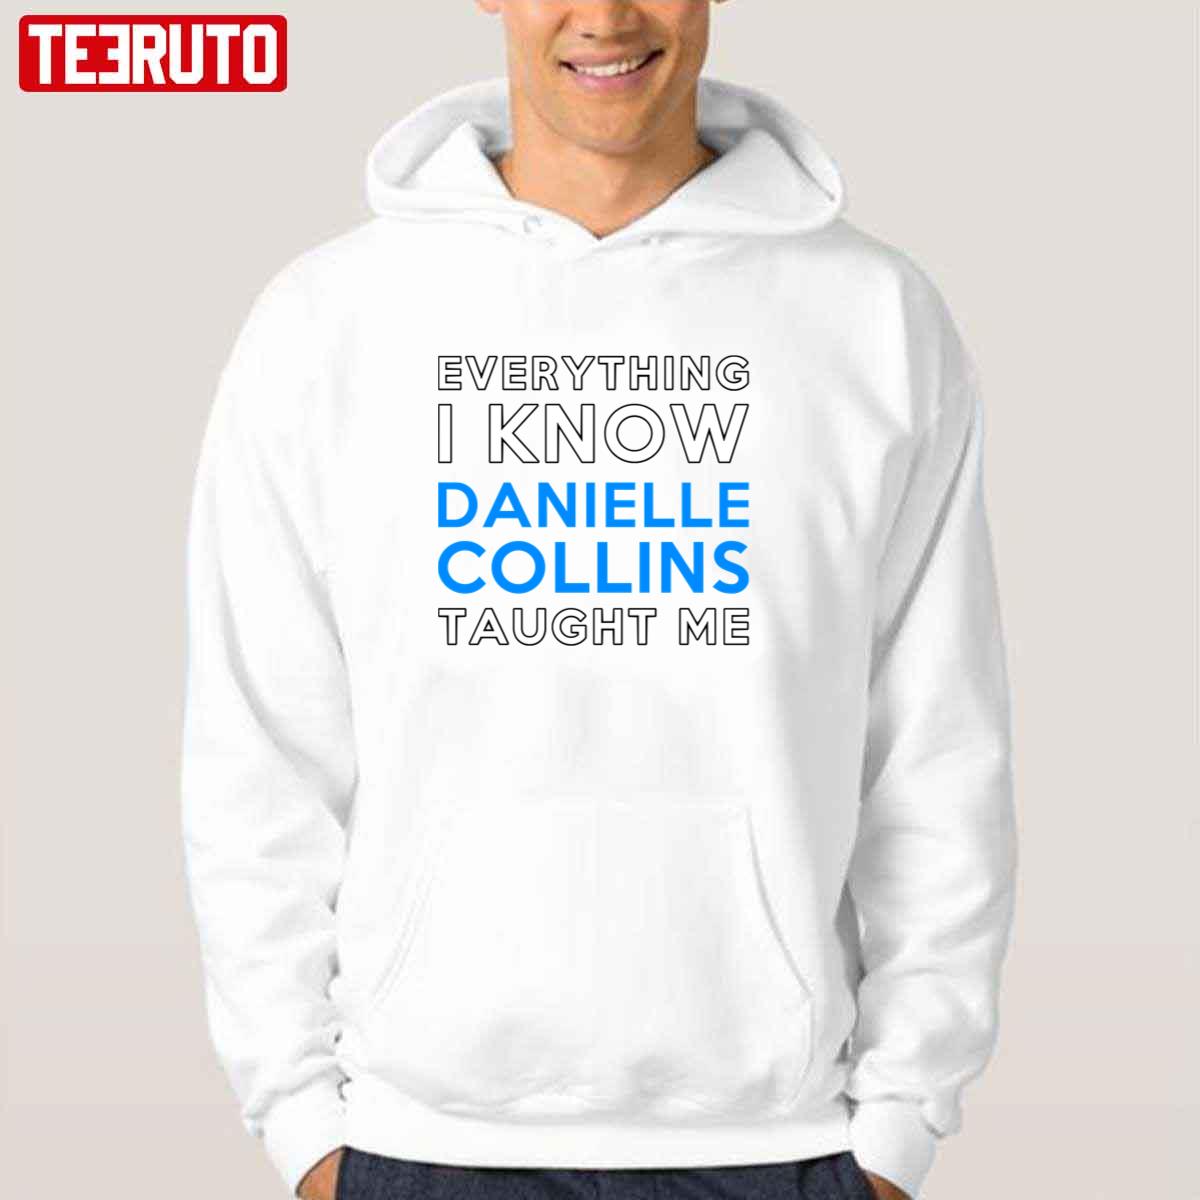 Everything I Know Danielle Collins Taught Me Unisex Hoodie